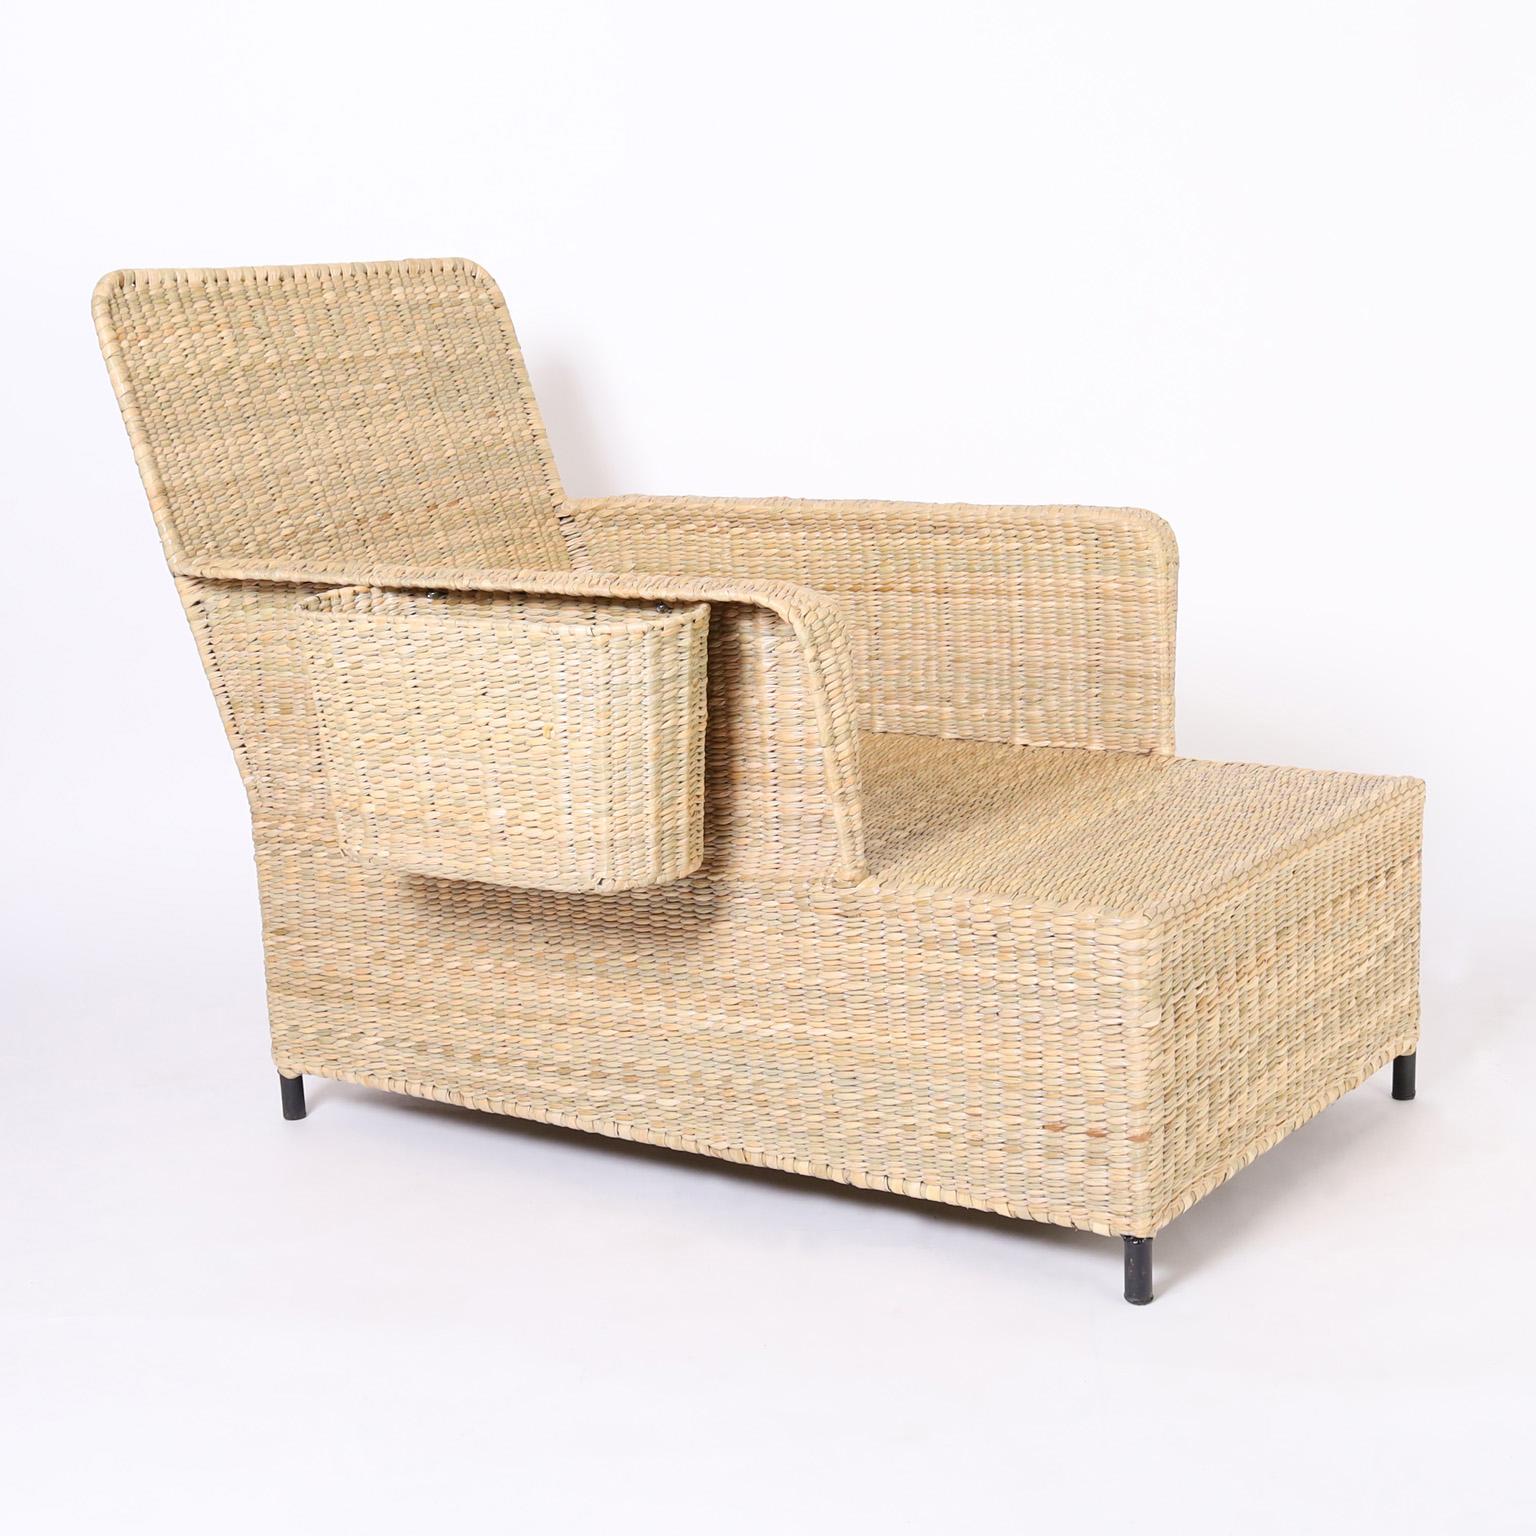 The Palm Beach, an impressive pair of midcentury inspired coastal chaise lounges with book or computer baskets handcrafted with durable metal frames ambitiously woven with reed in a chic form from the 2023 FS Flores Collection designed and